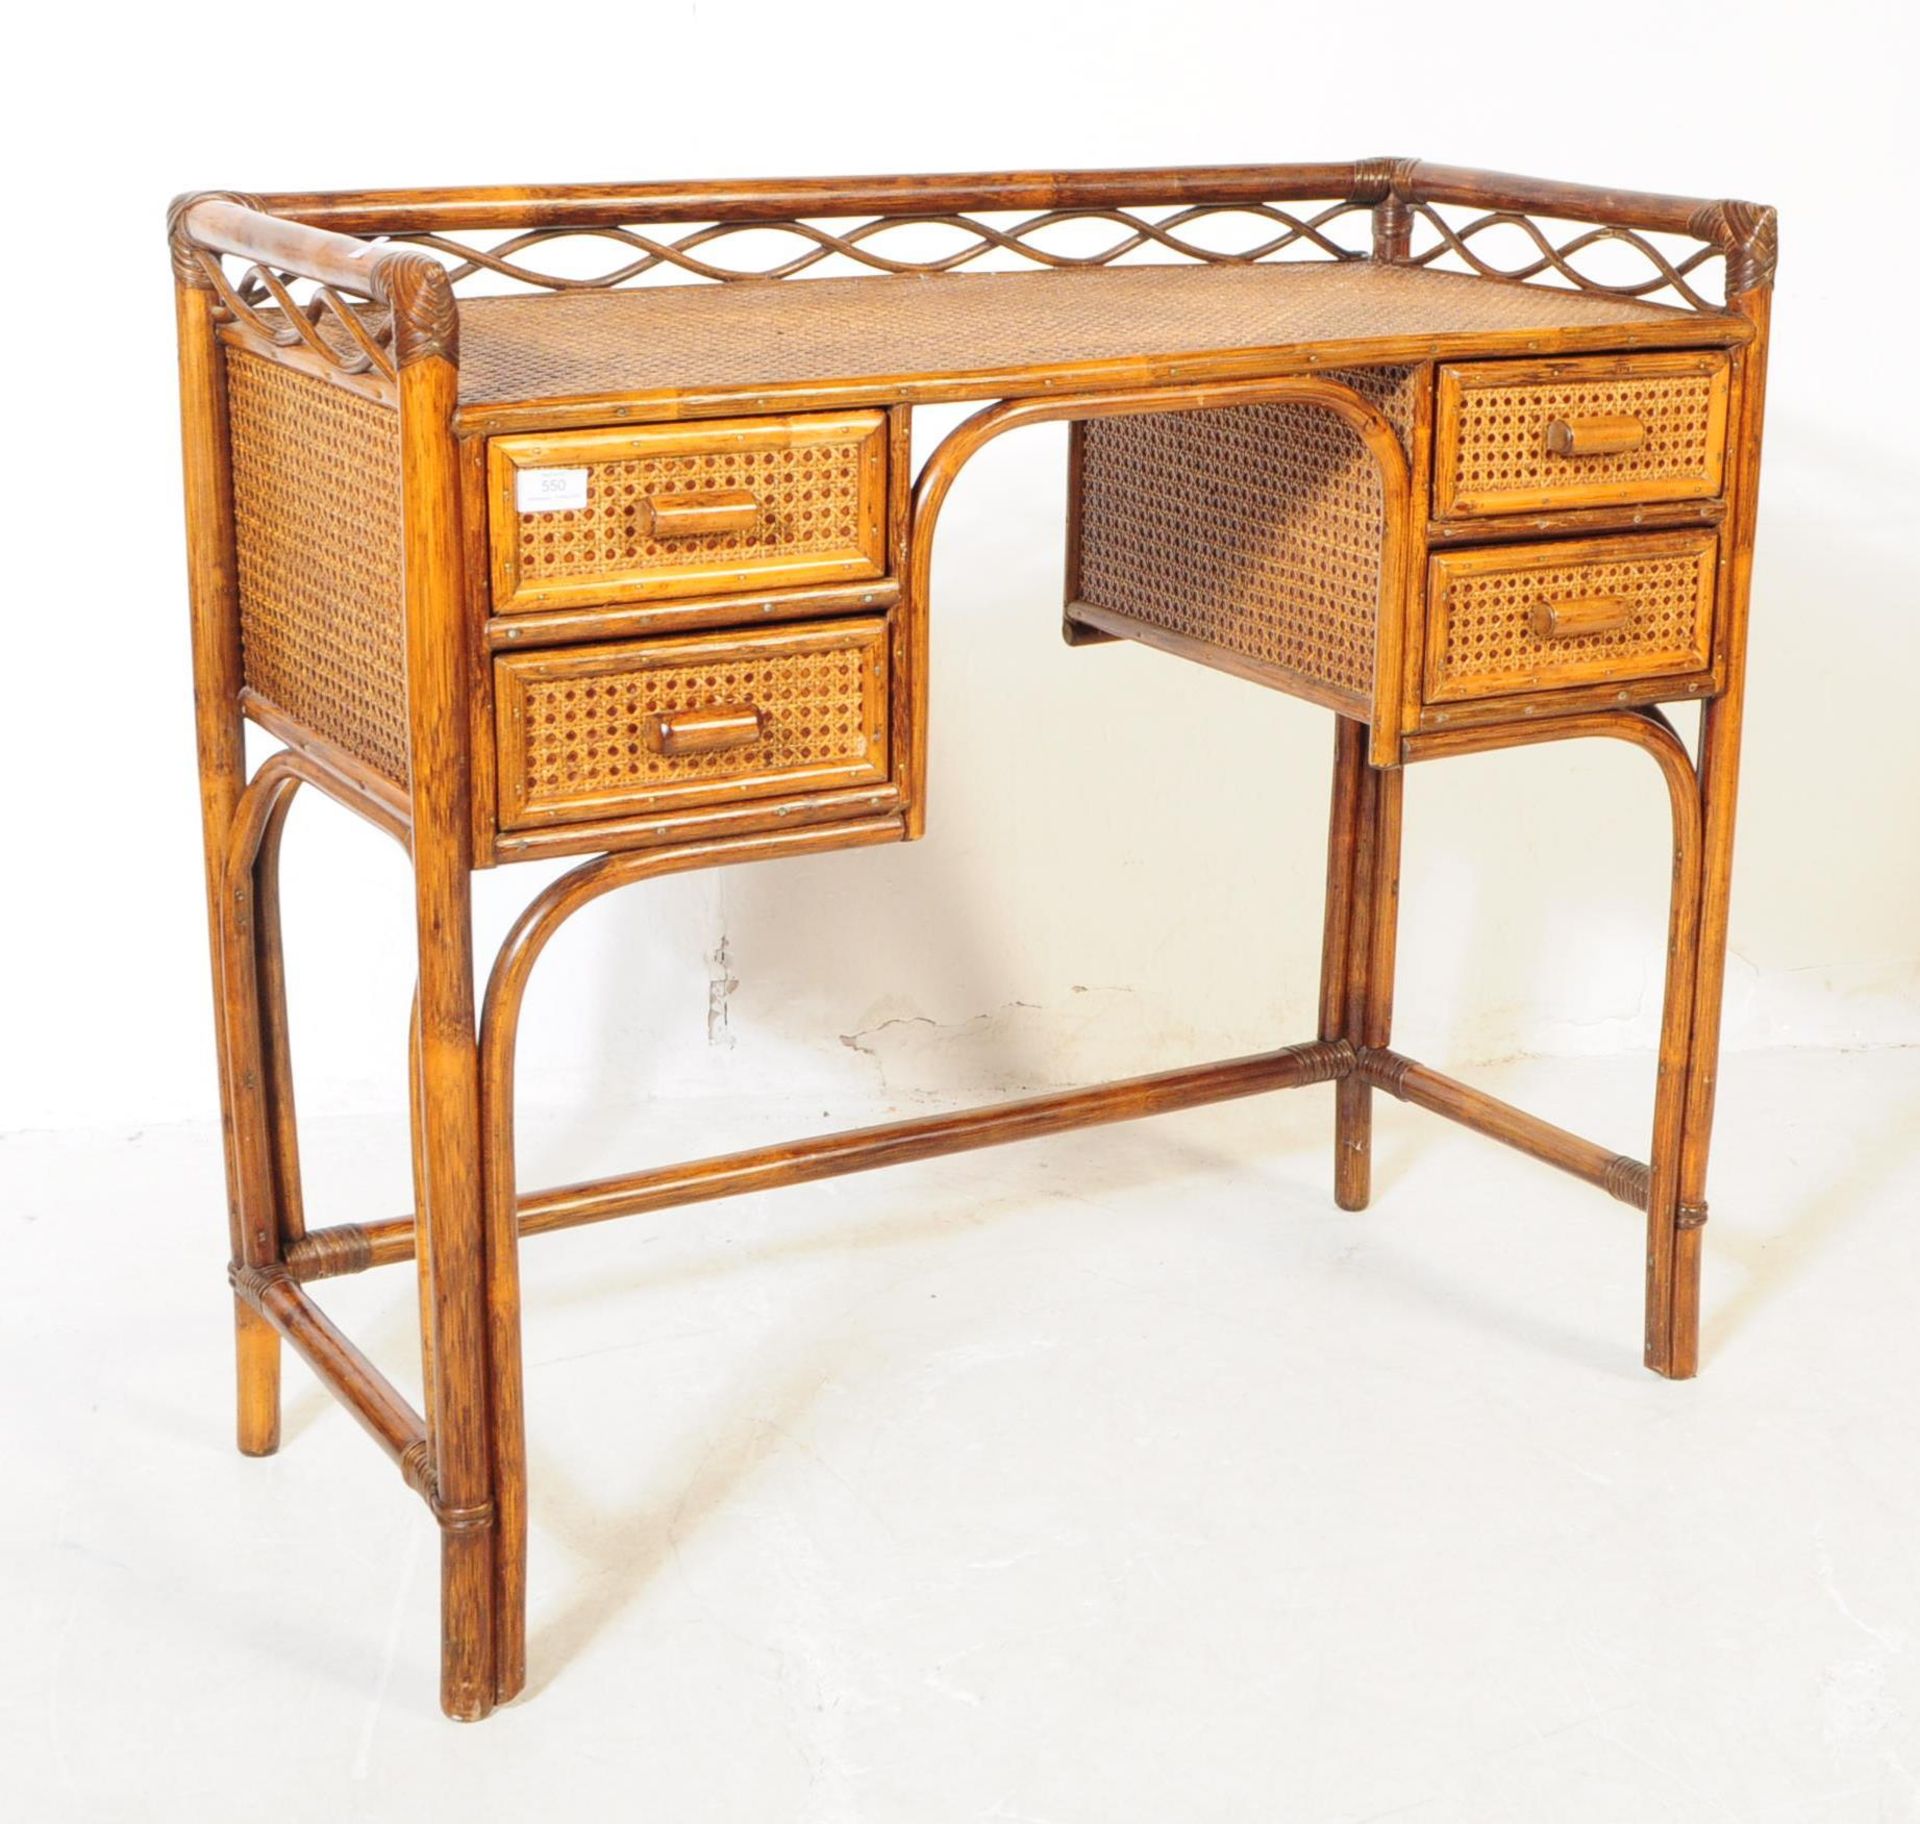 ANGRAVES OF LEICESTER - RETRO MID 20TH CENTURY RATTAN DESK